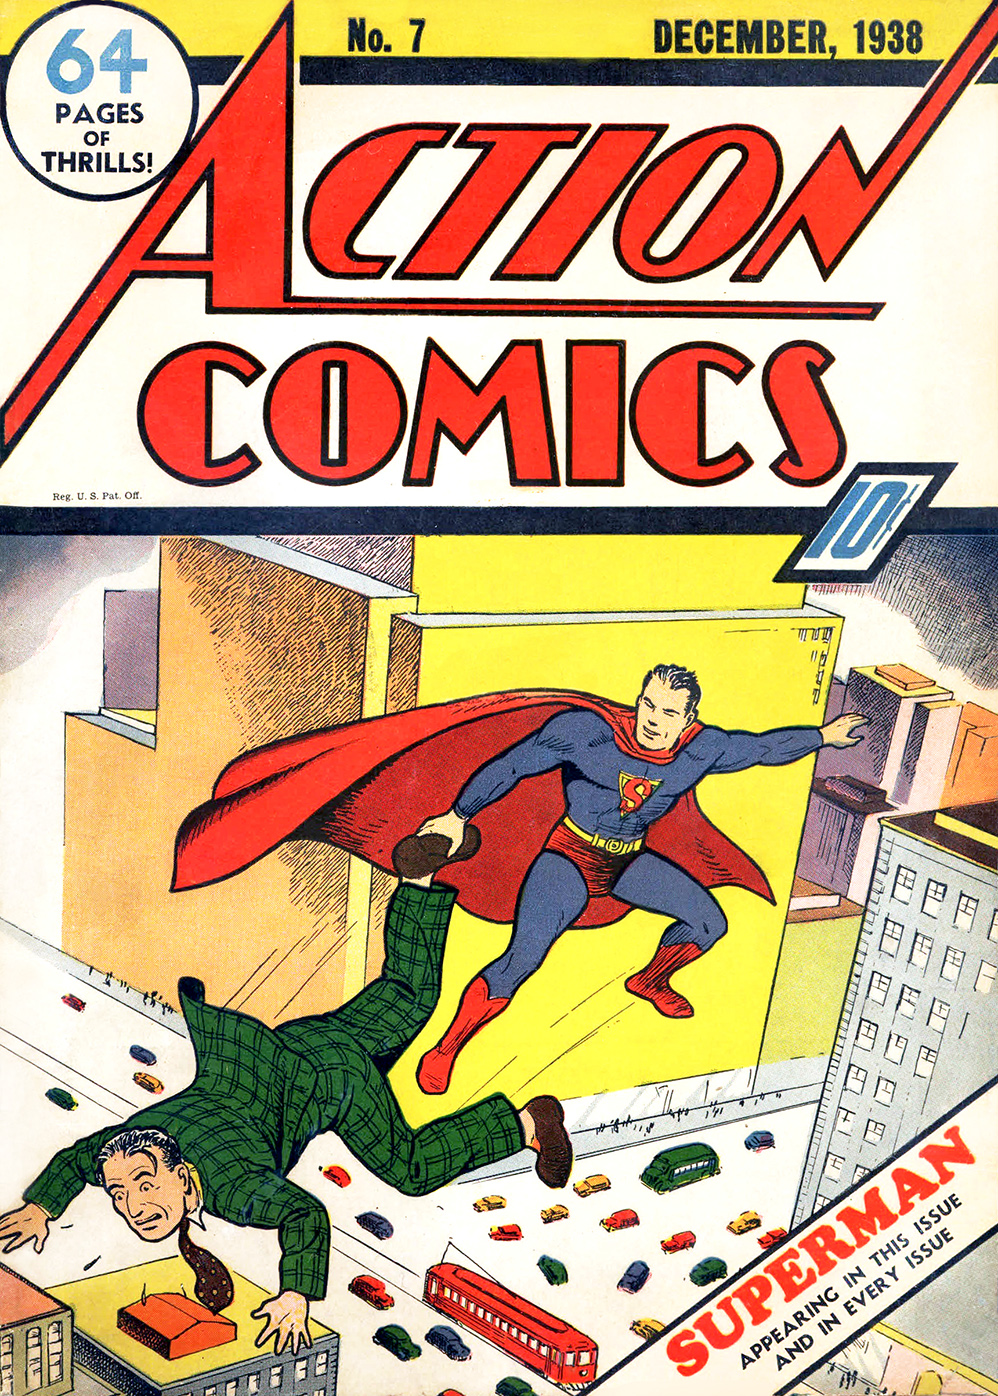 Action Comics #7 - The Golden Age Superman to the rescue! Latest?cb=20140125192331